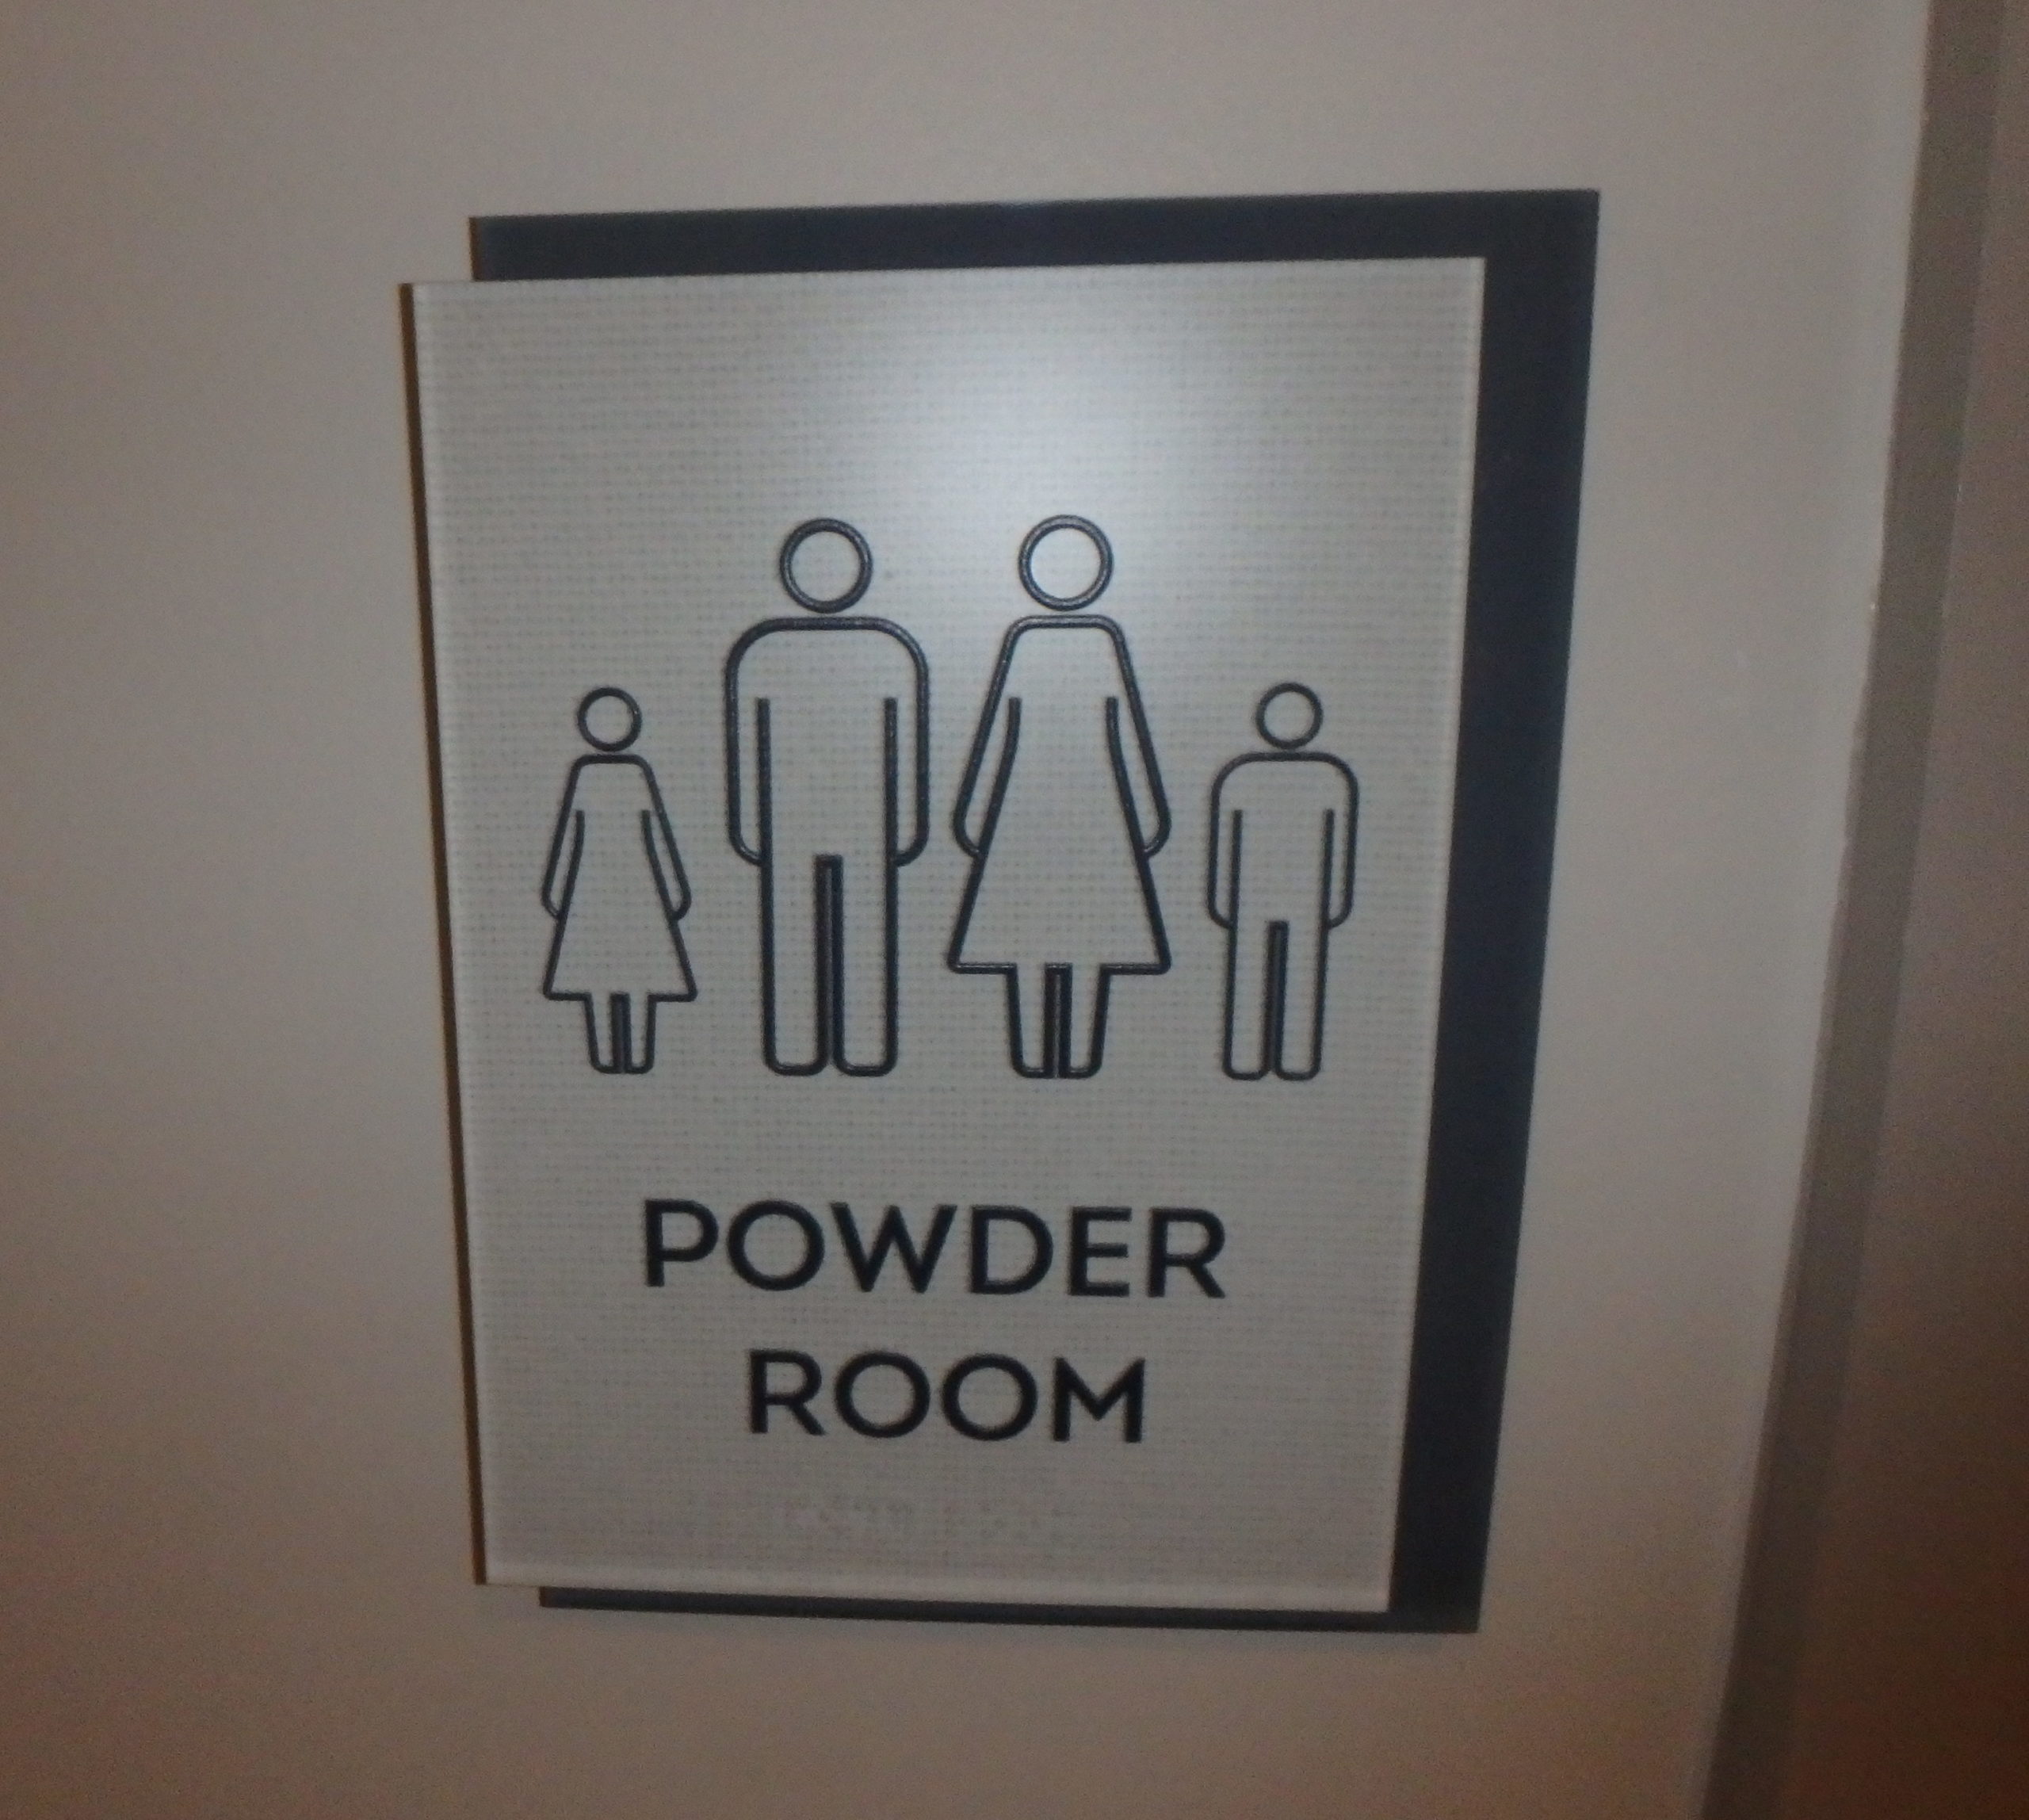 Accessible powder room sign.